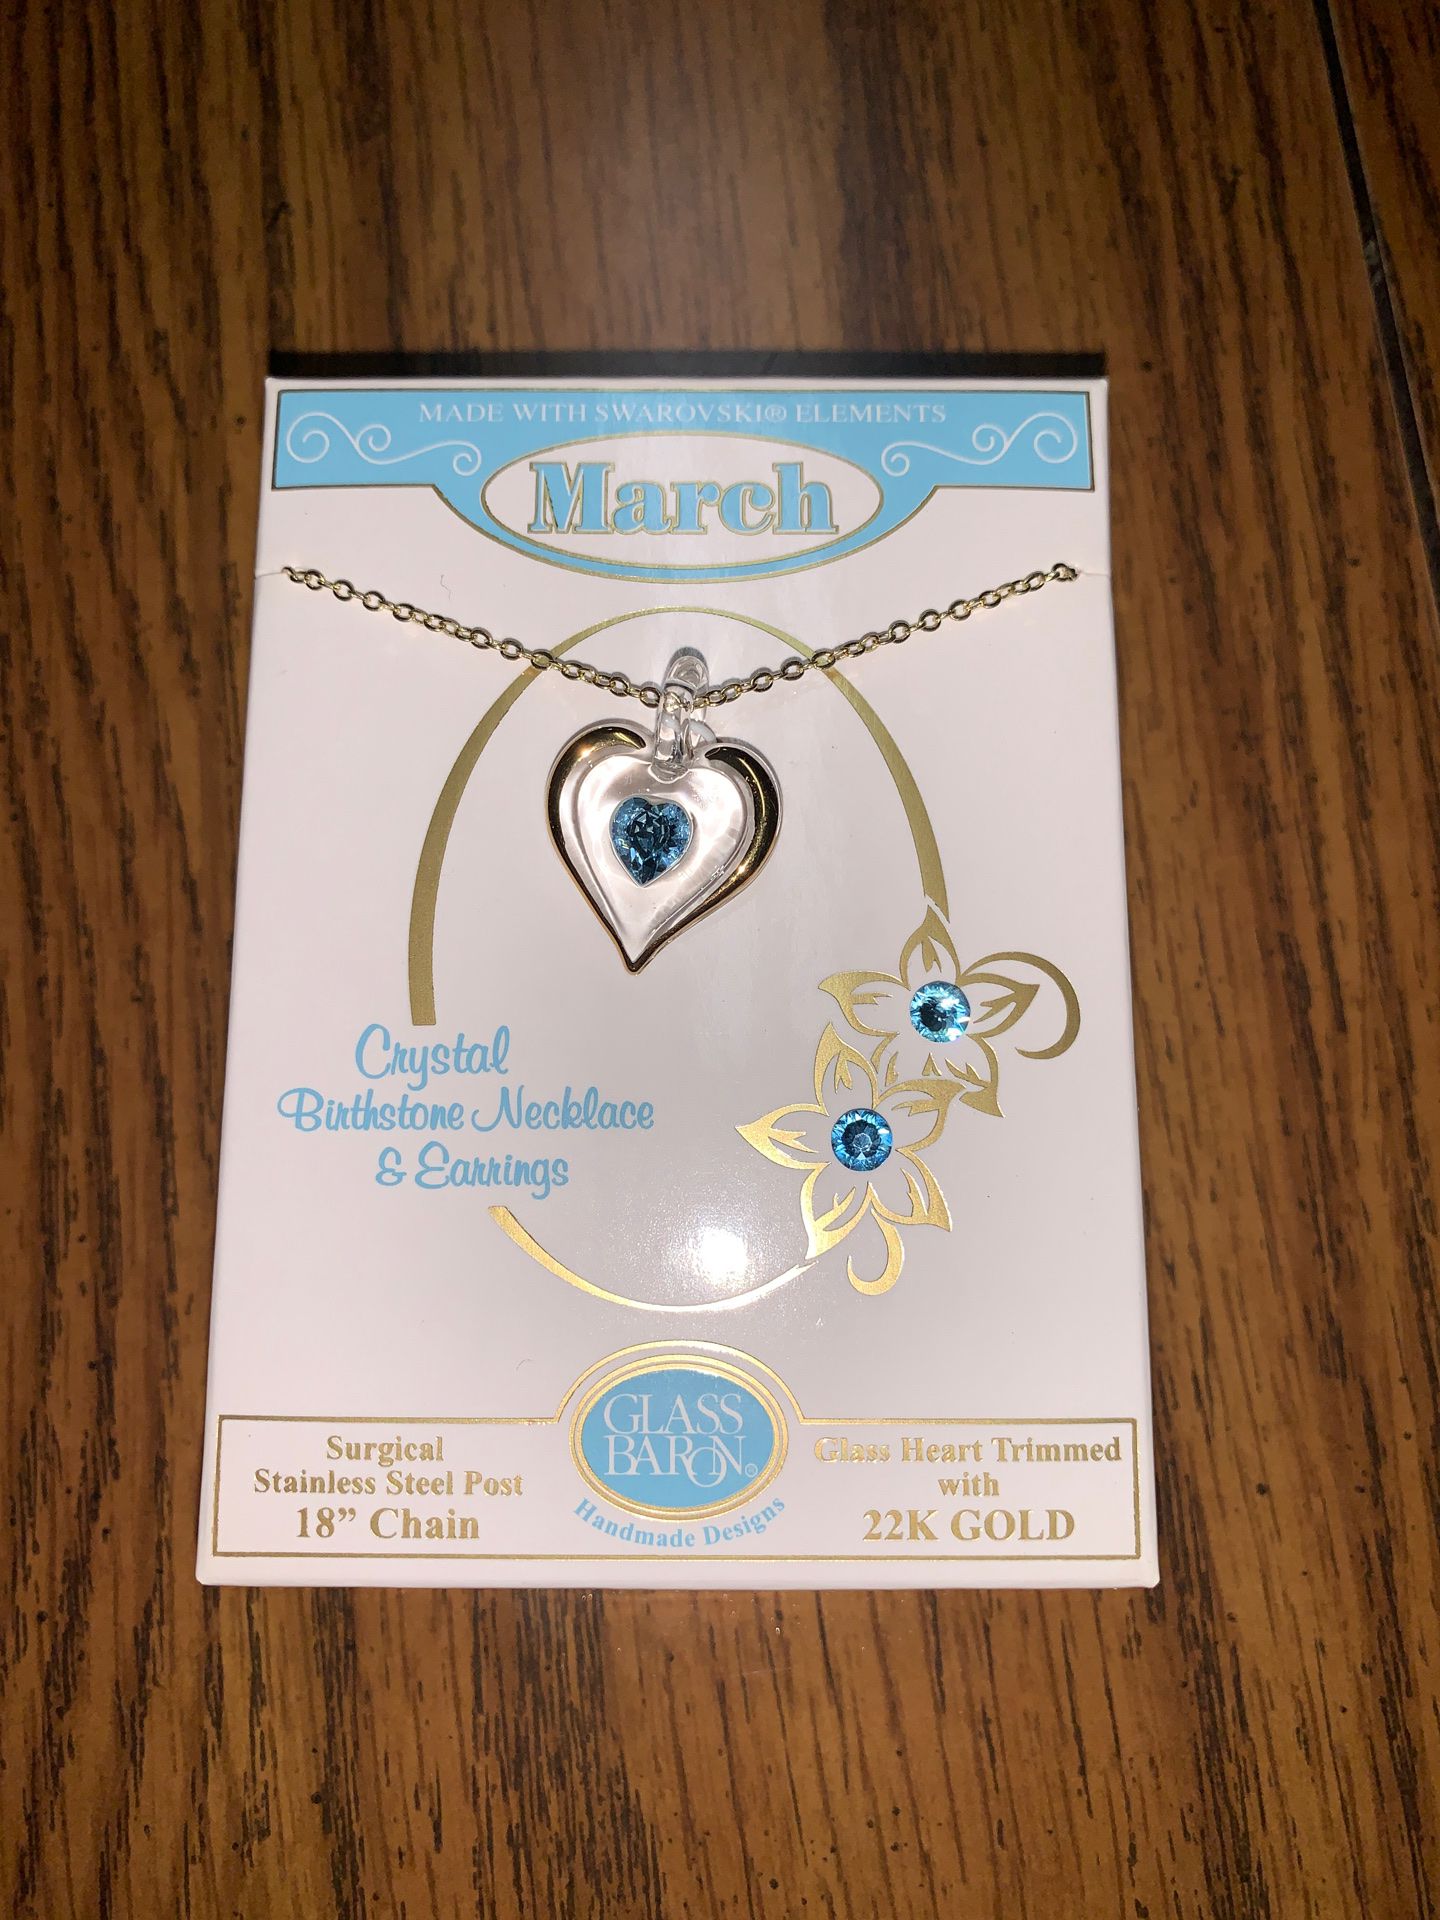 Brand new still in the box March stainless steel post 18 chain 22k gold glass heart trimmed I payed 22 asking 15 necklace and earring set